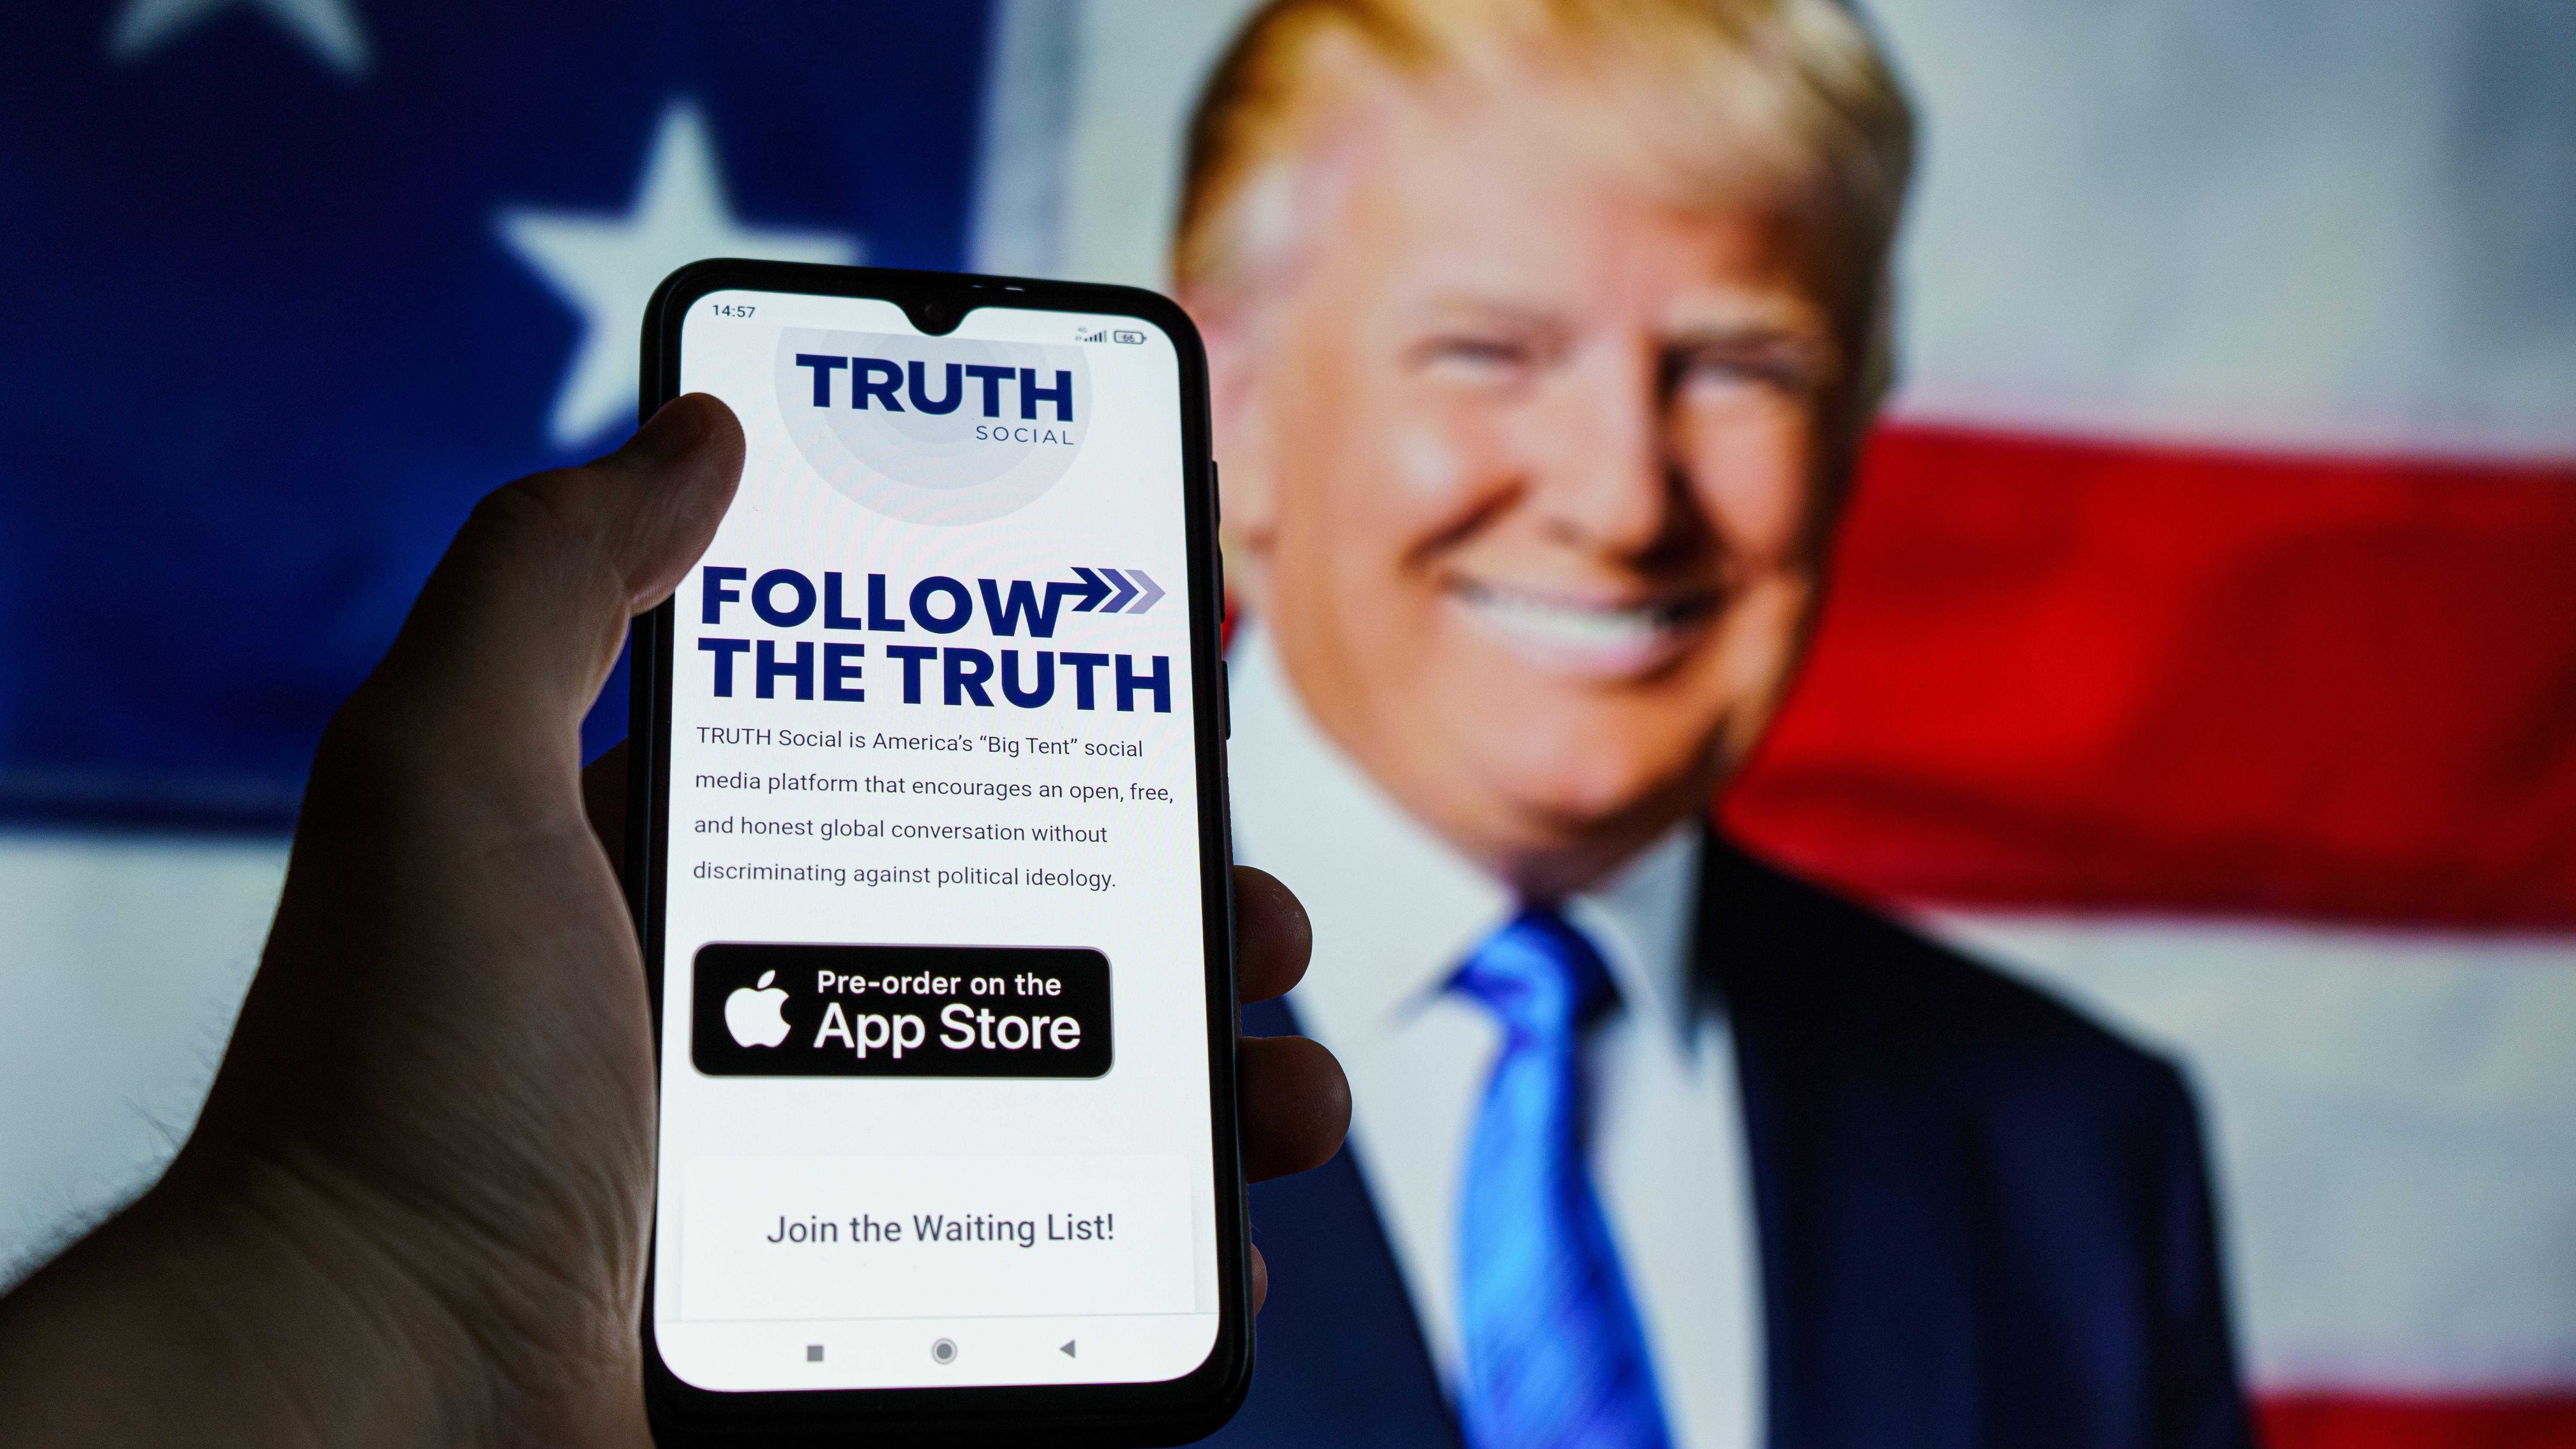 Truth Social app seen on smartphone in front of former President Donald Trump's face